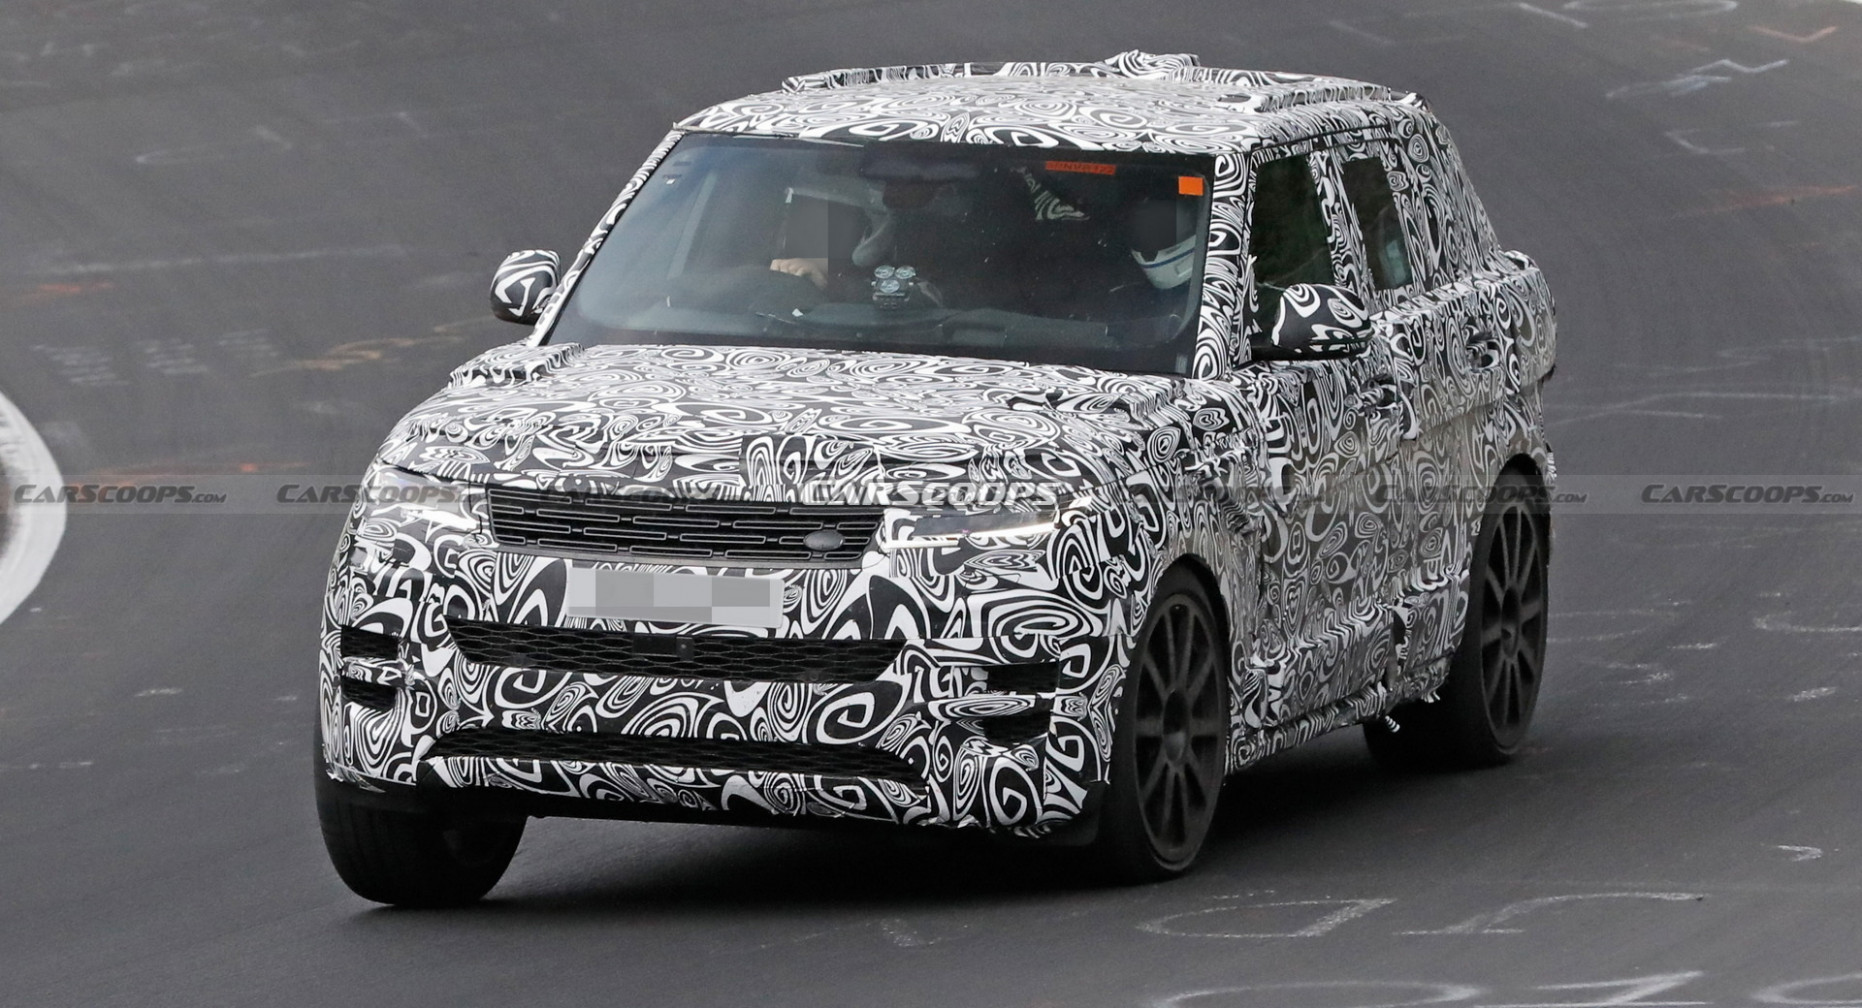 5 Range Rover Sport Svr Shows More Of Its Face During 2023 Range Rover Sport Review